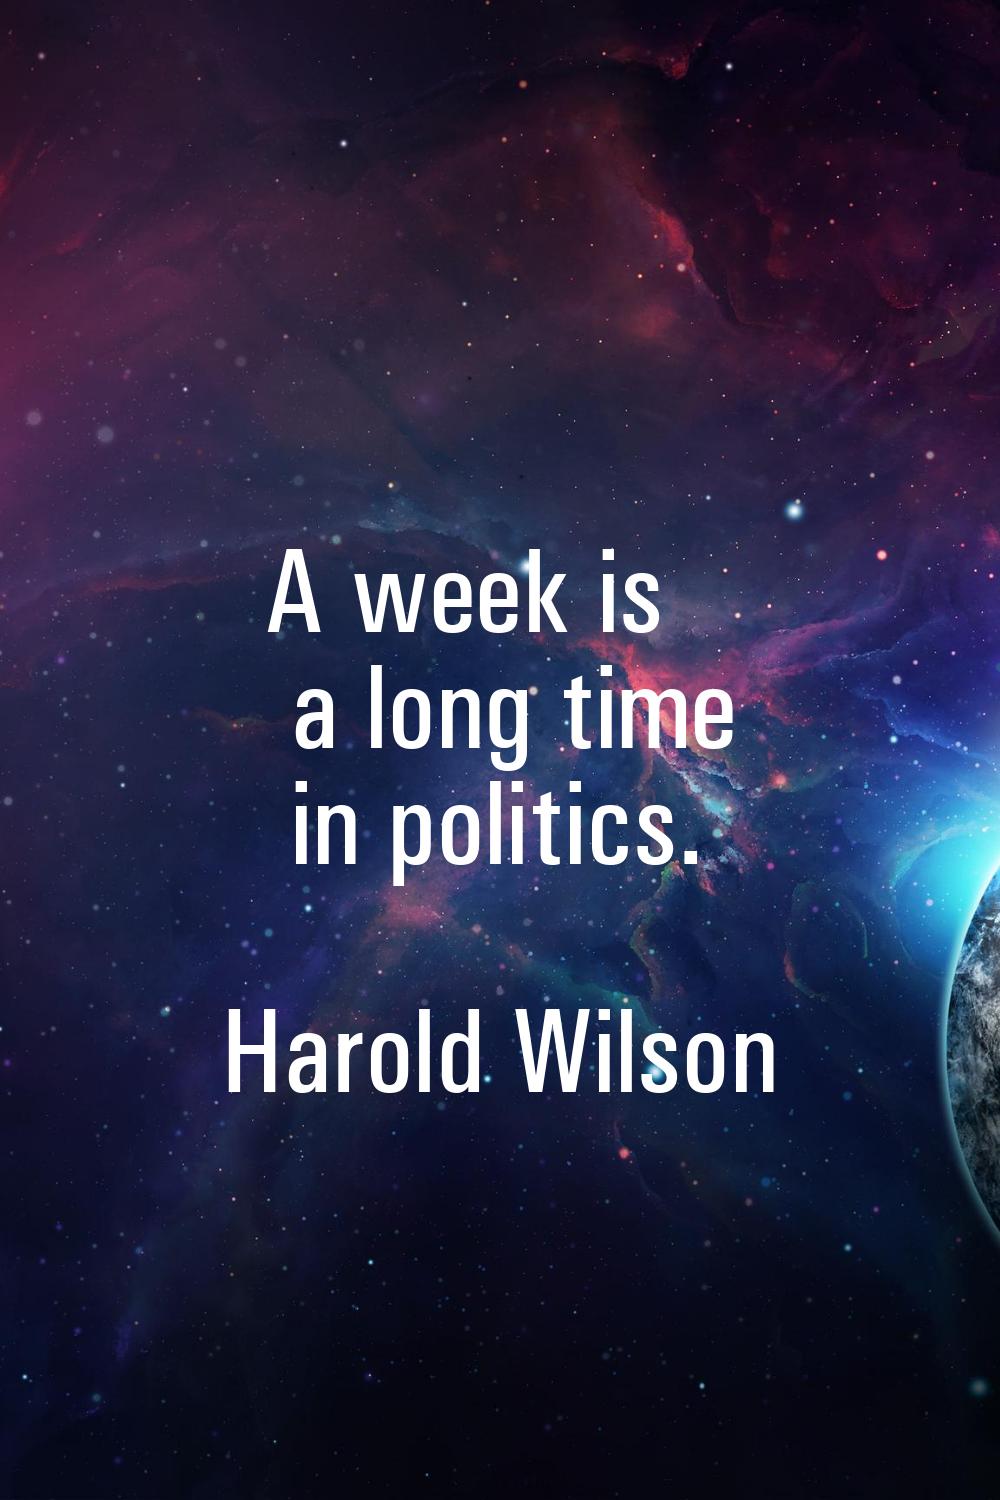 A week is a long time in politics.